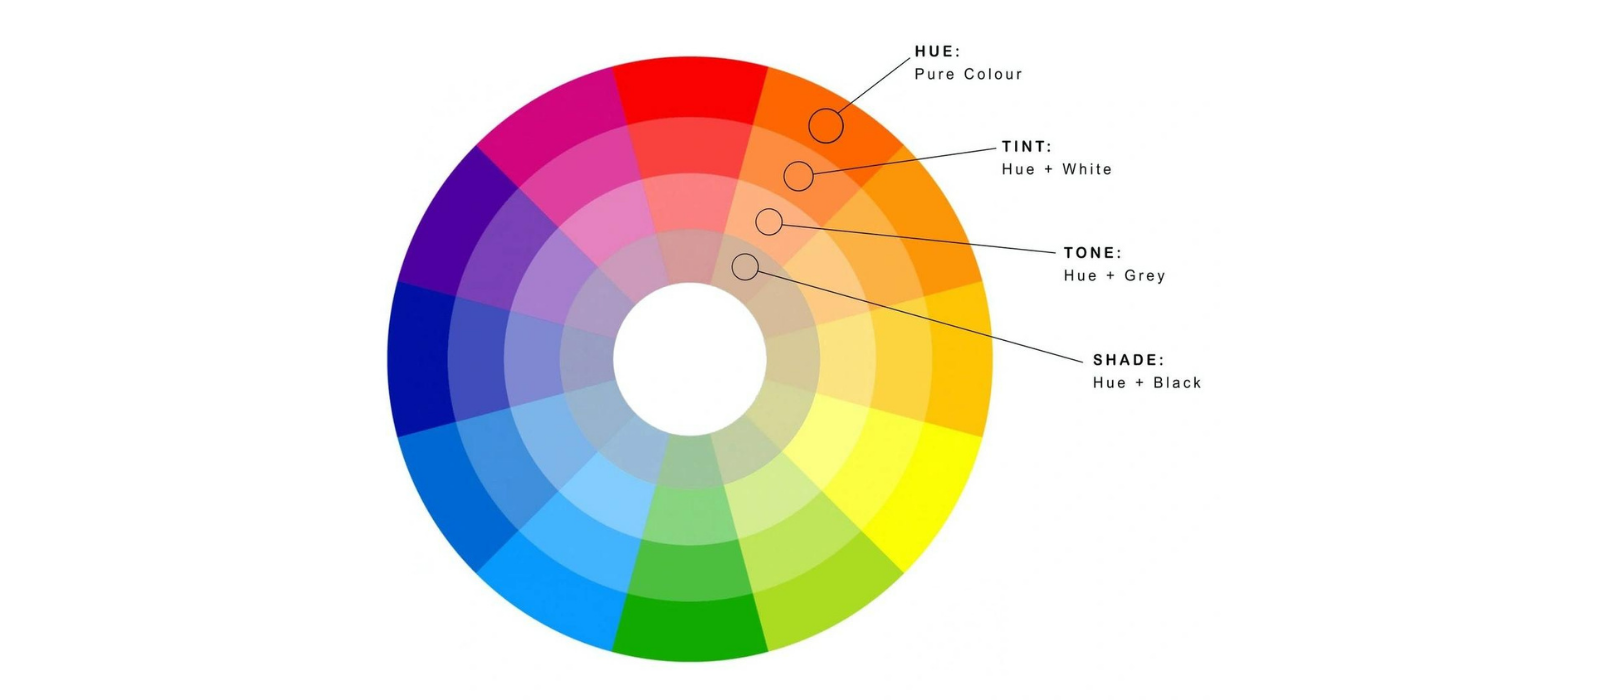 What is difference between Hue, Shade, Tint and Tone in colour?